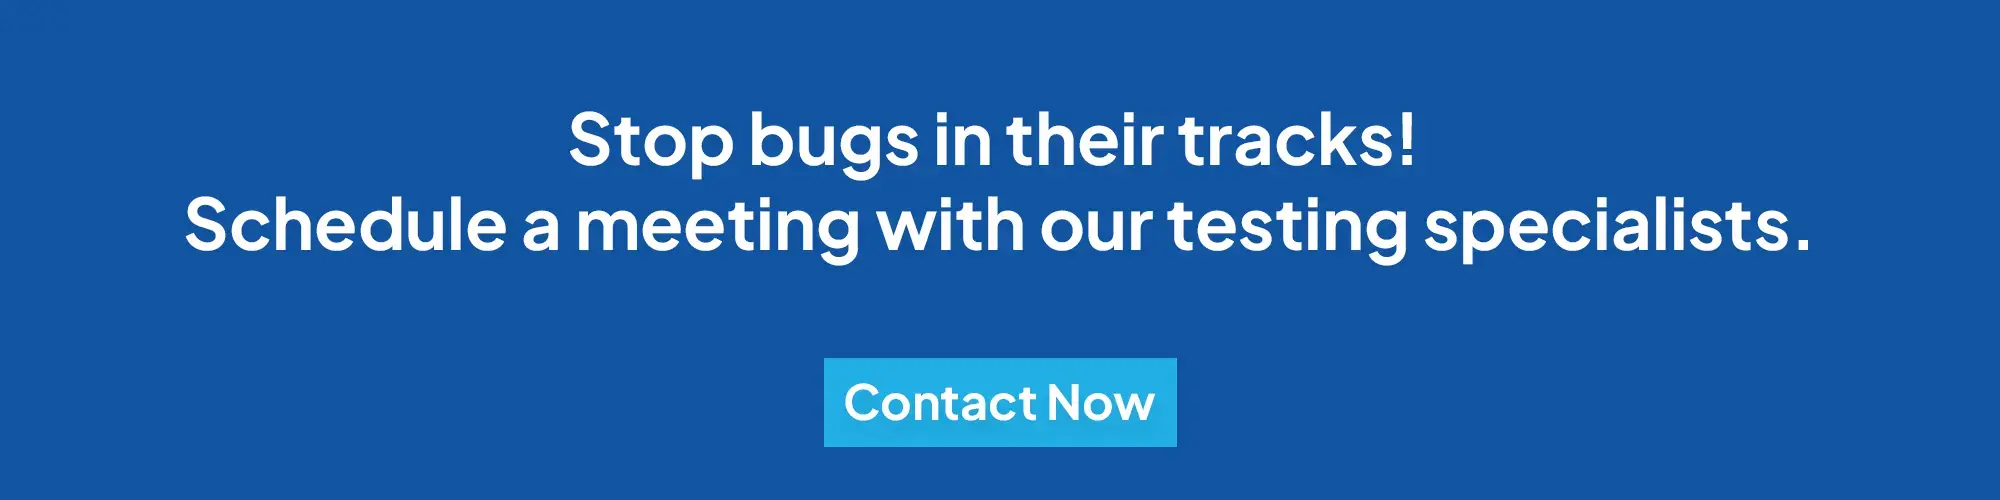 Stop bugs in their tracks! schedule a meeting with our testing specialists. CTA